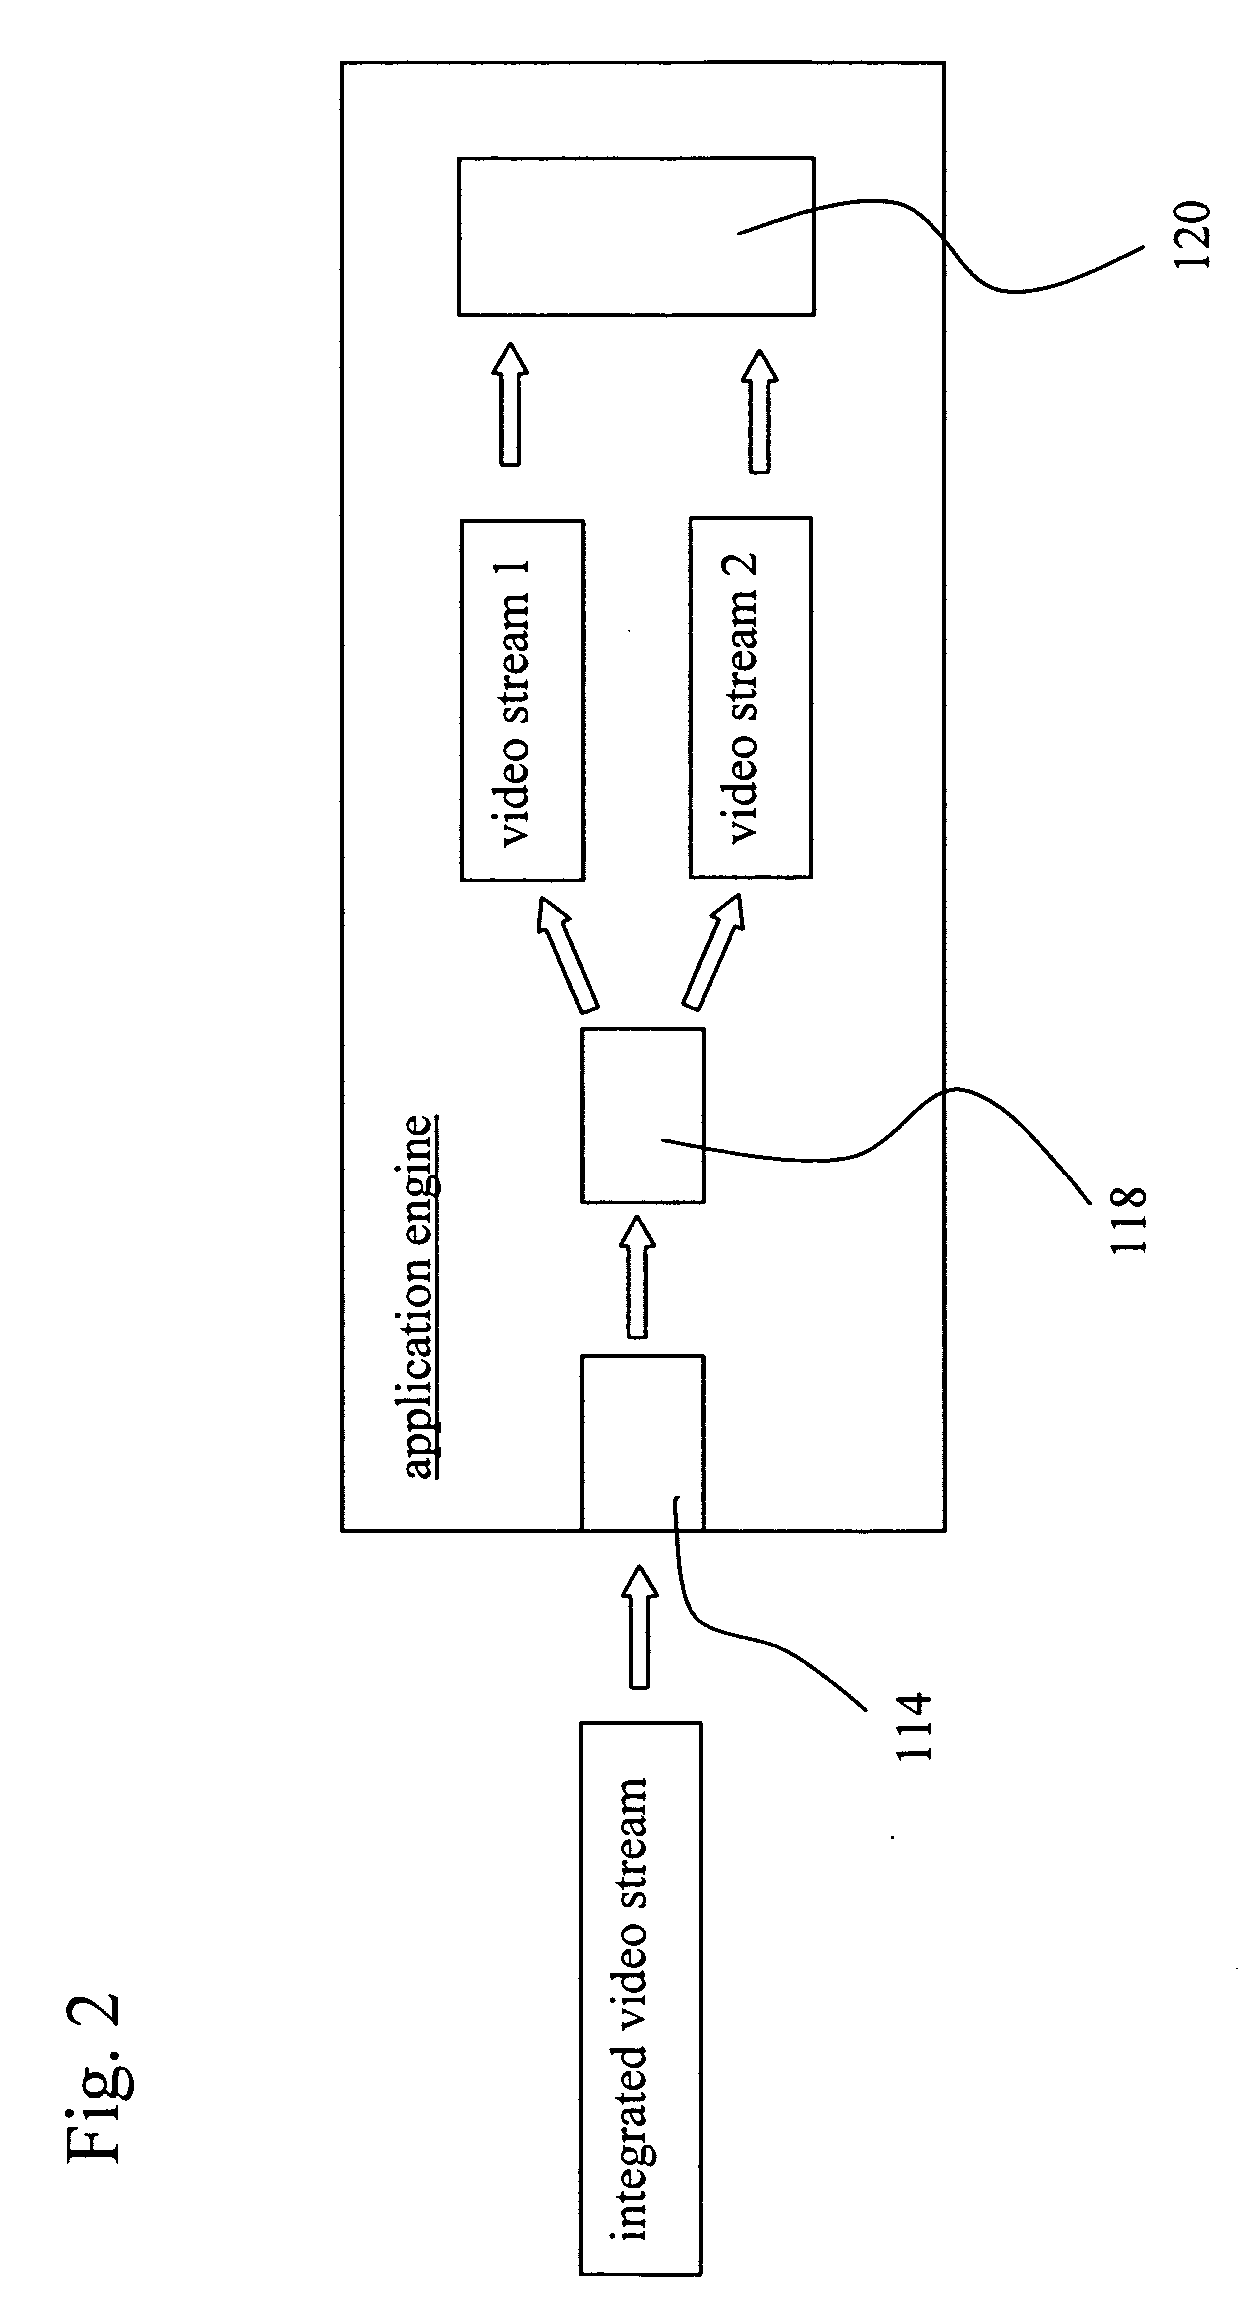 Multi-camera solution for electronic devices